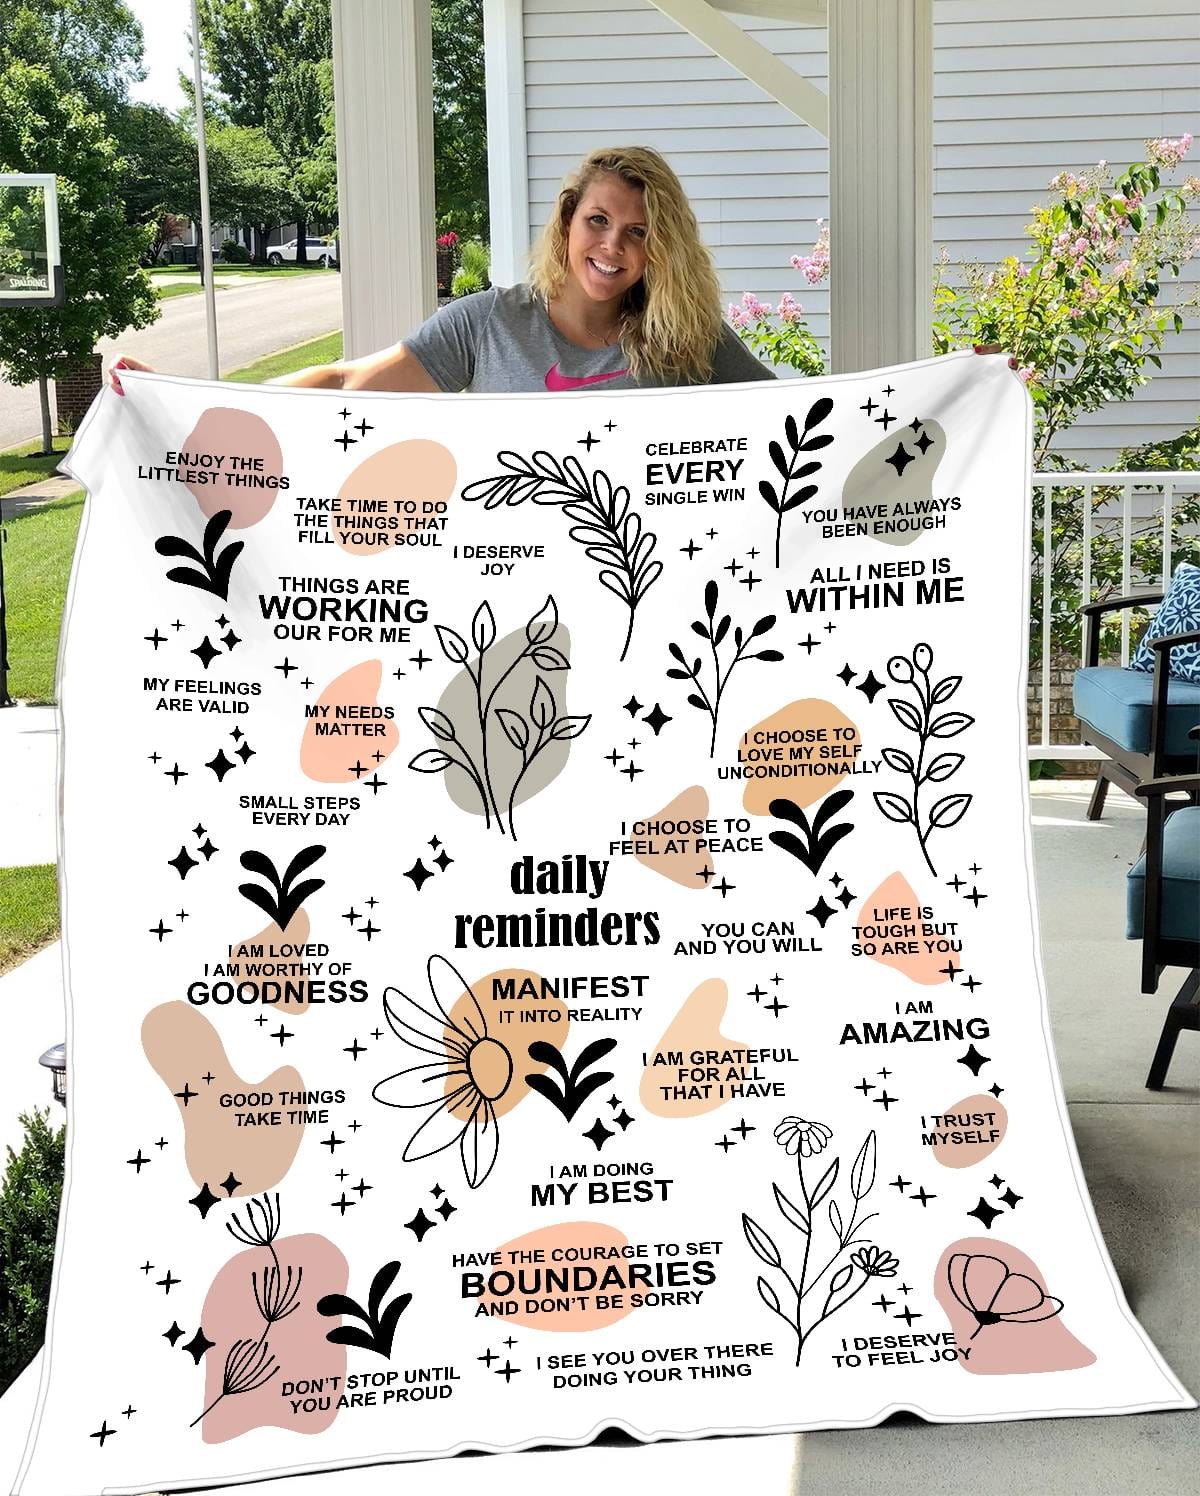 Daily Reminders Positive Affirmations Blanket